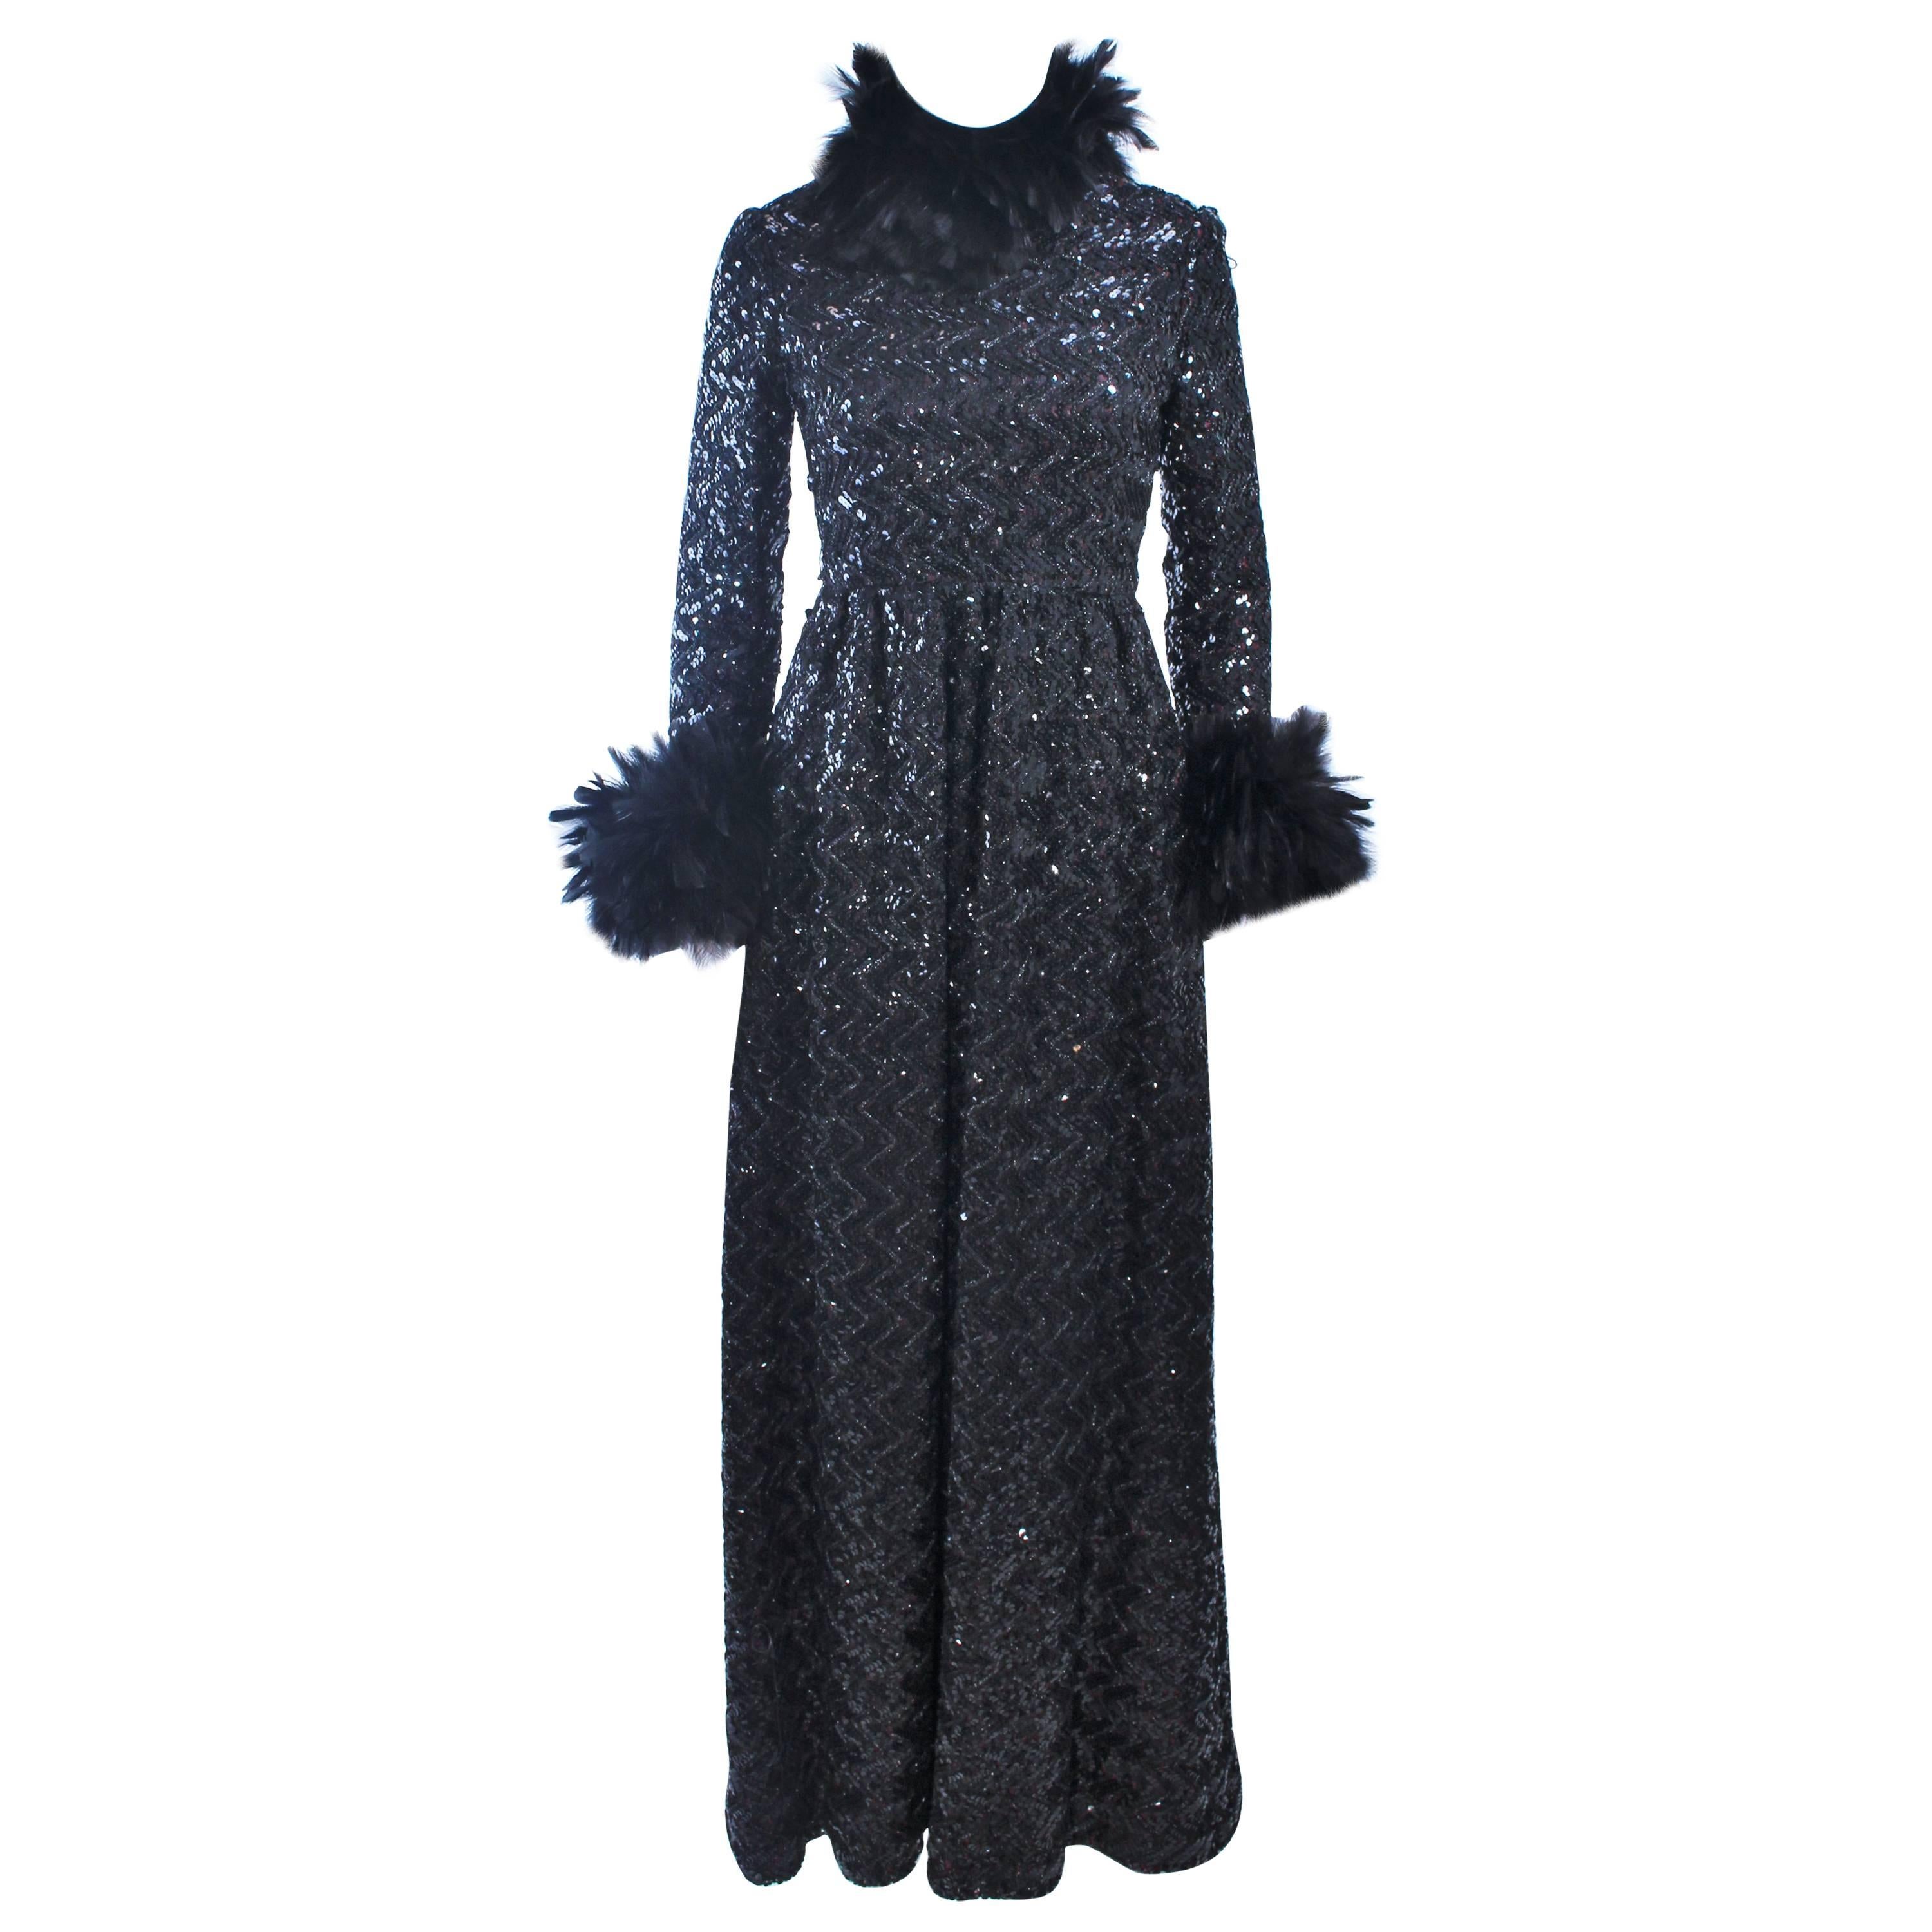 AMELIA GRAY Black Sequin Gown with Feather Trim Size 2 4 For Sale